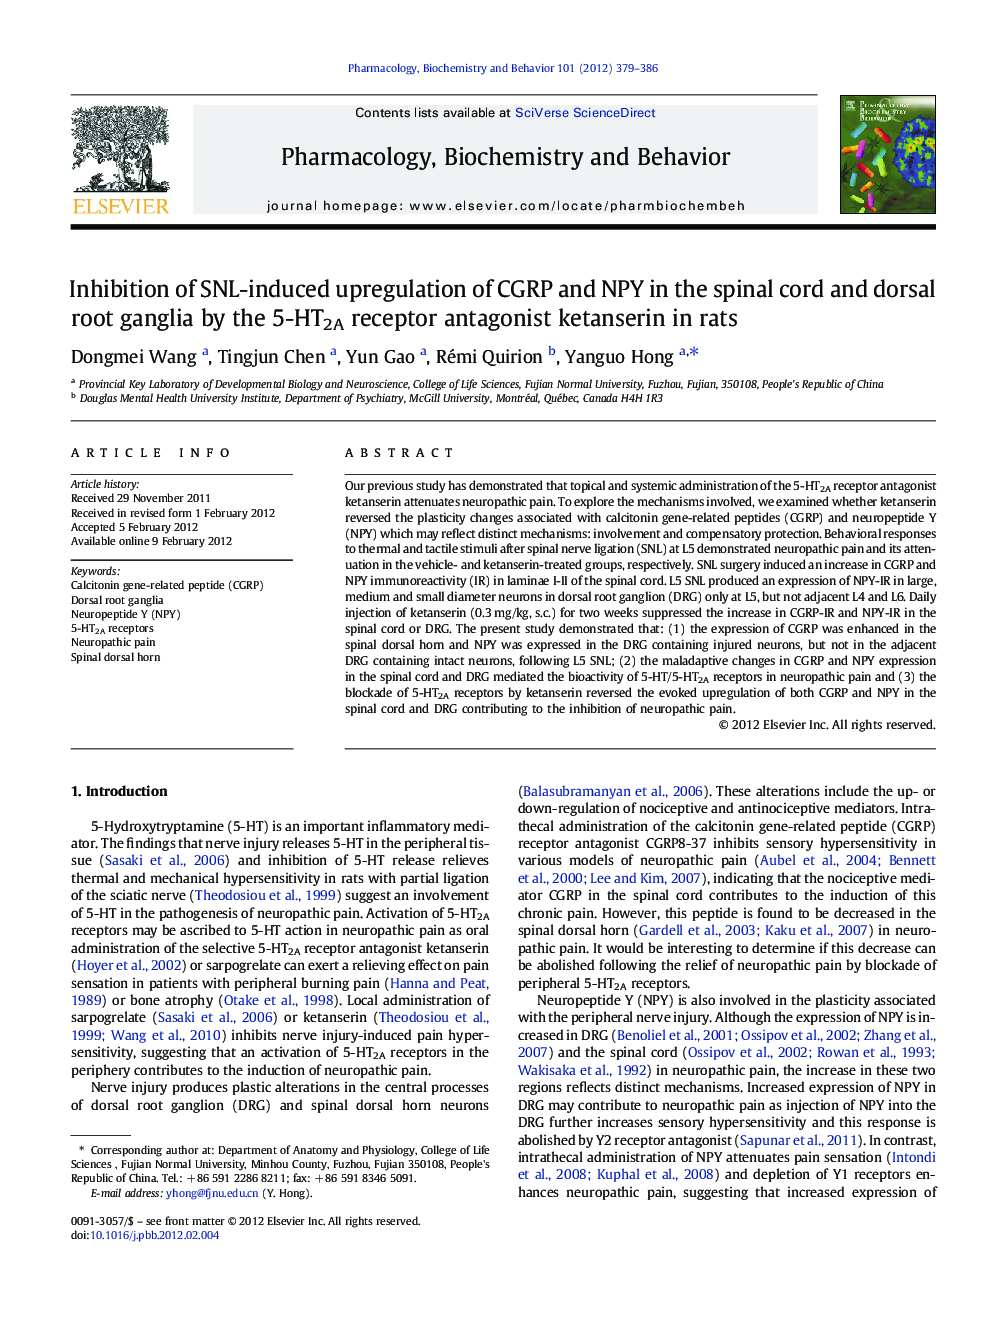 Inhibition of SNL-induced upregulation of CGRP and NPY in the spinal cord and dorsal root ganglia by the 5-HT2A receptor antagonist ketanserin in rats